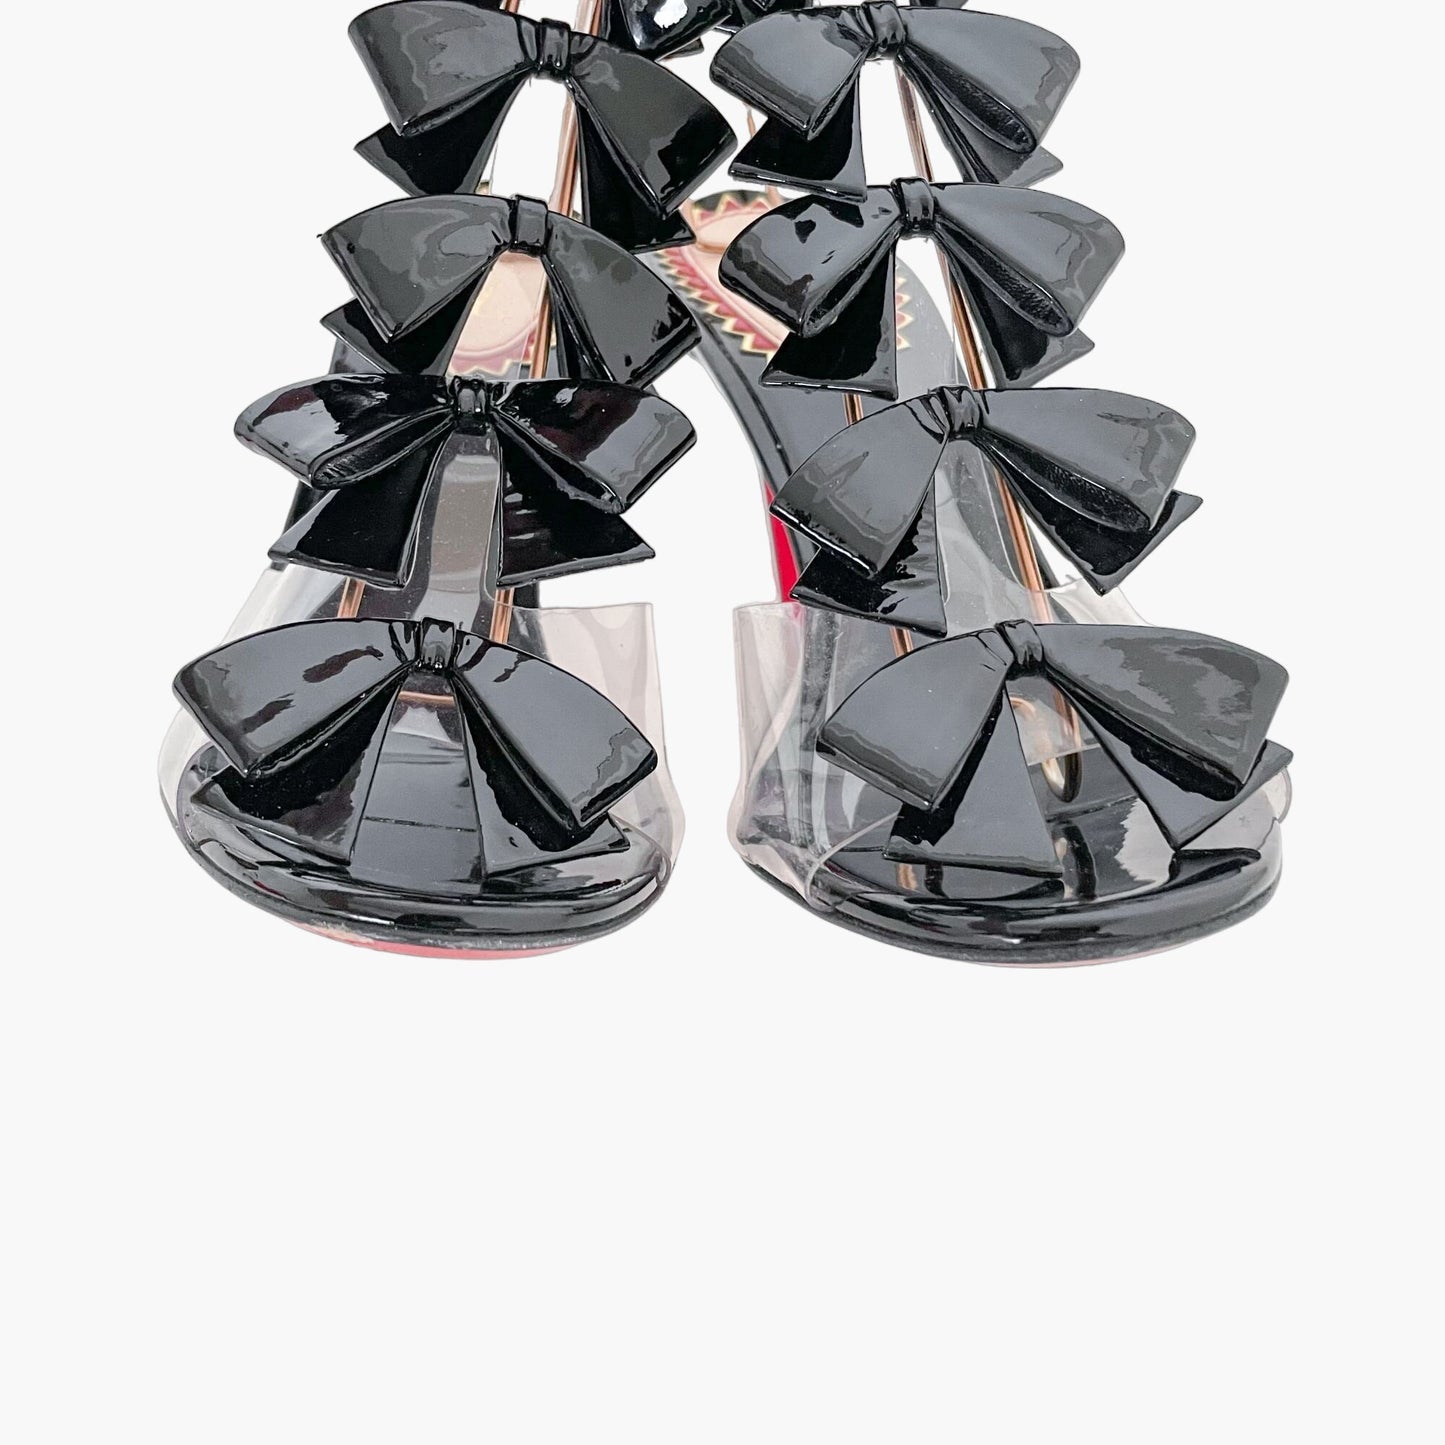 Christian Louboutin Bow Bow 100 Sandals in PVC & Black Patent Leather Size 40